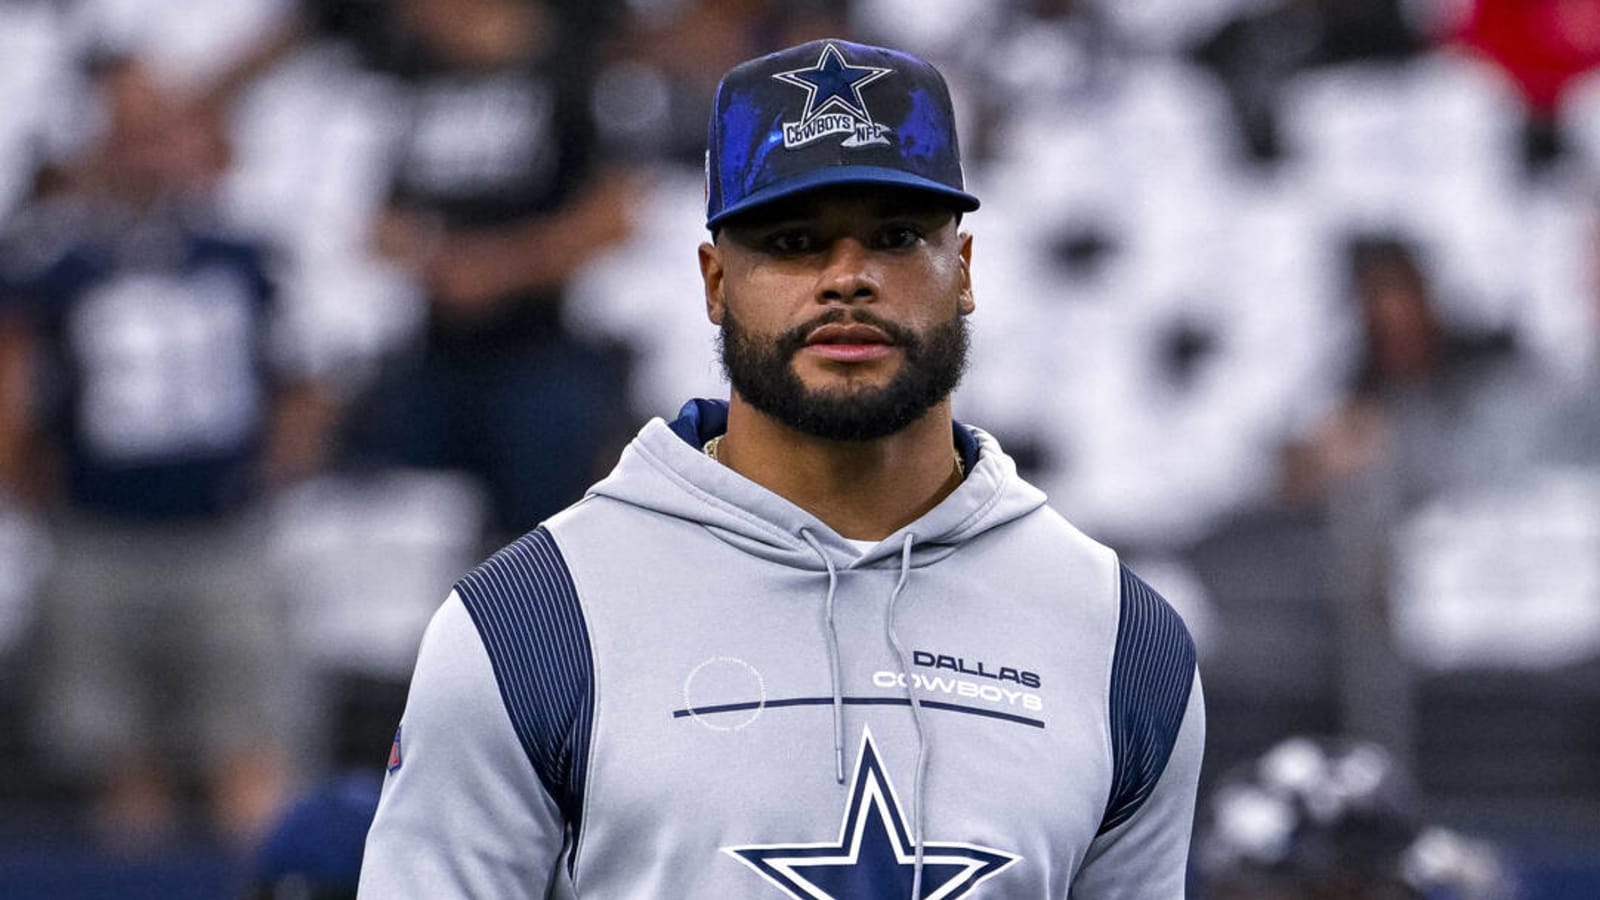 Jerry Jones: Dak 'cannot yet grip a football well enough to play'